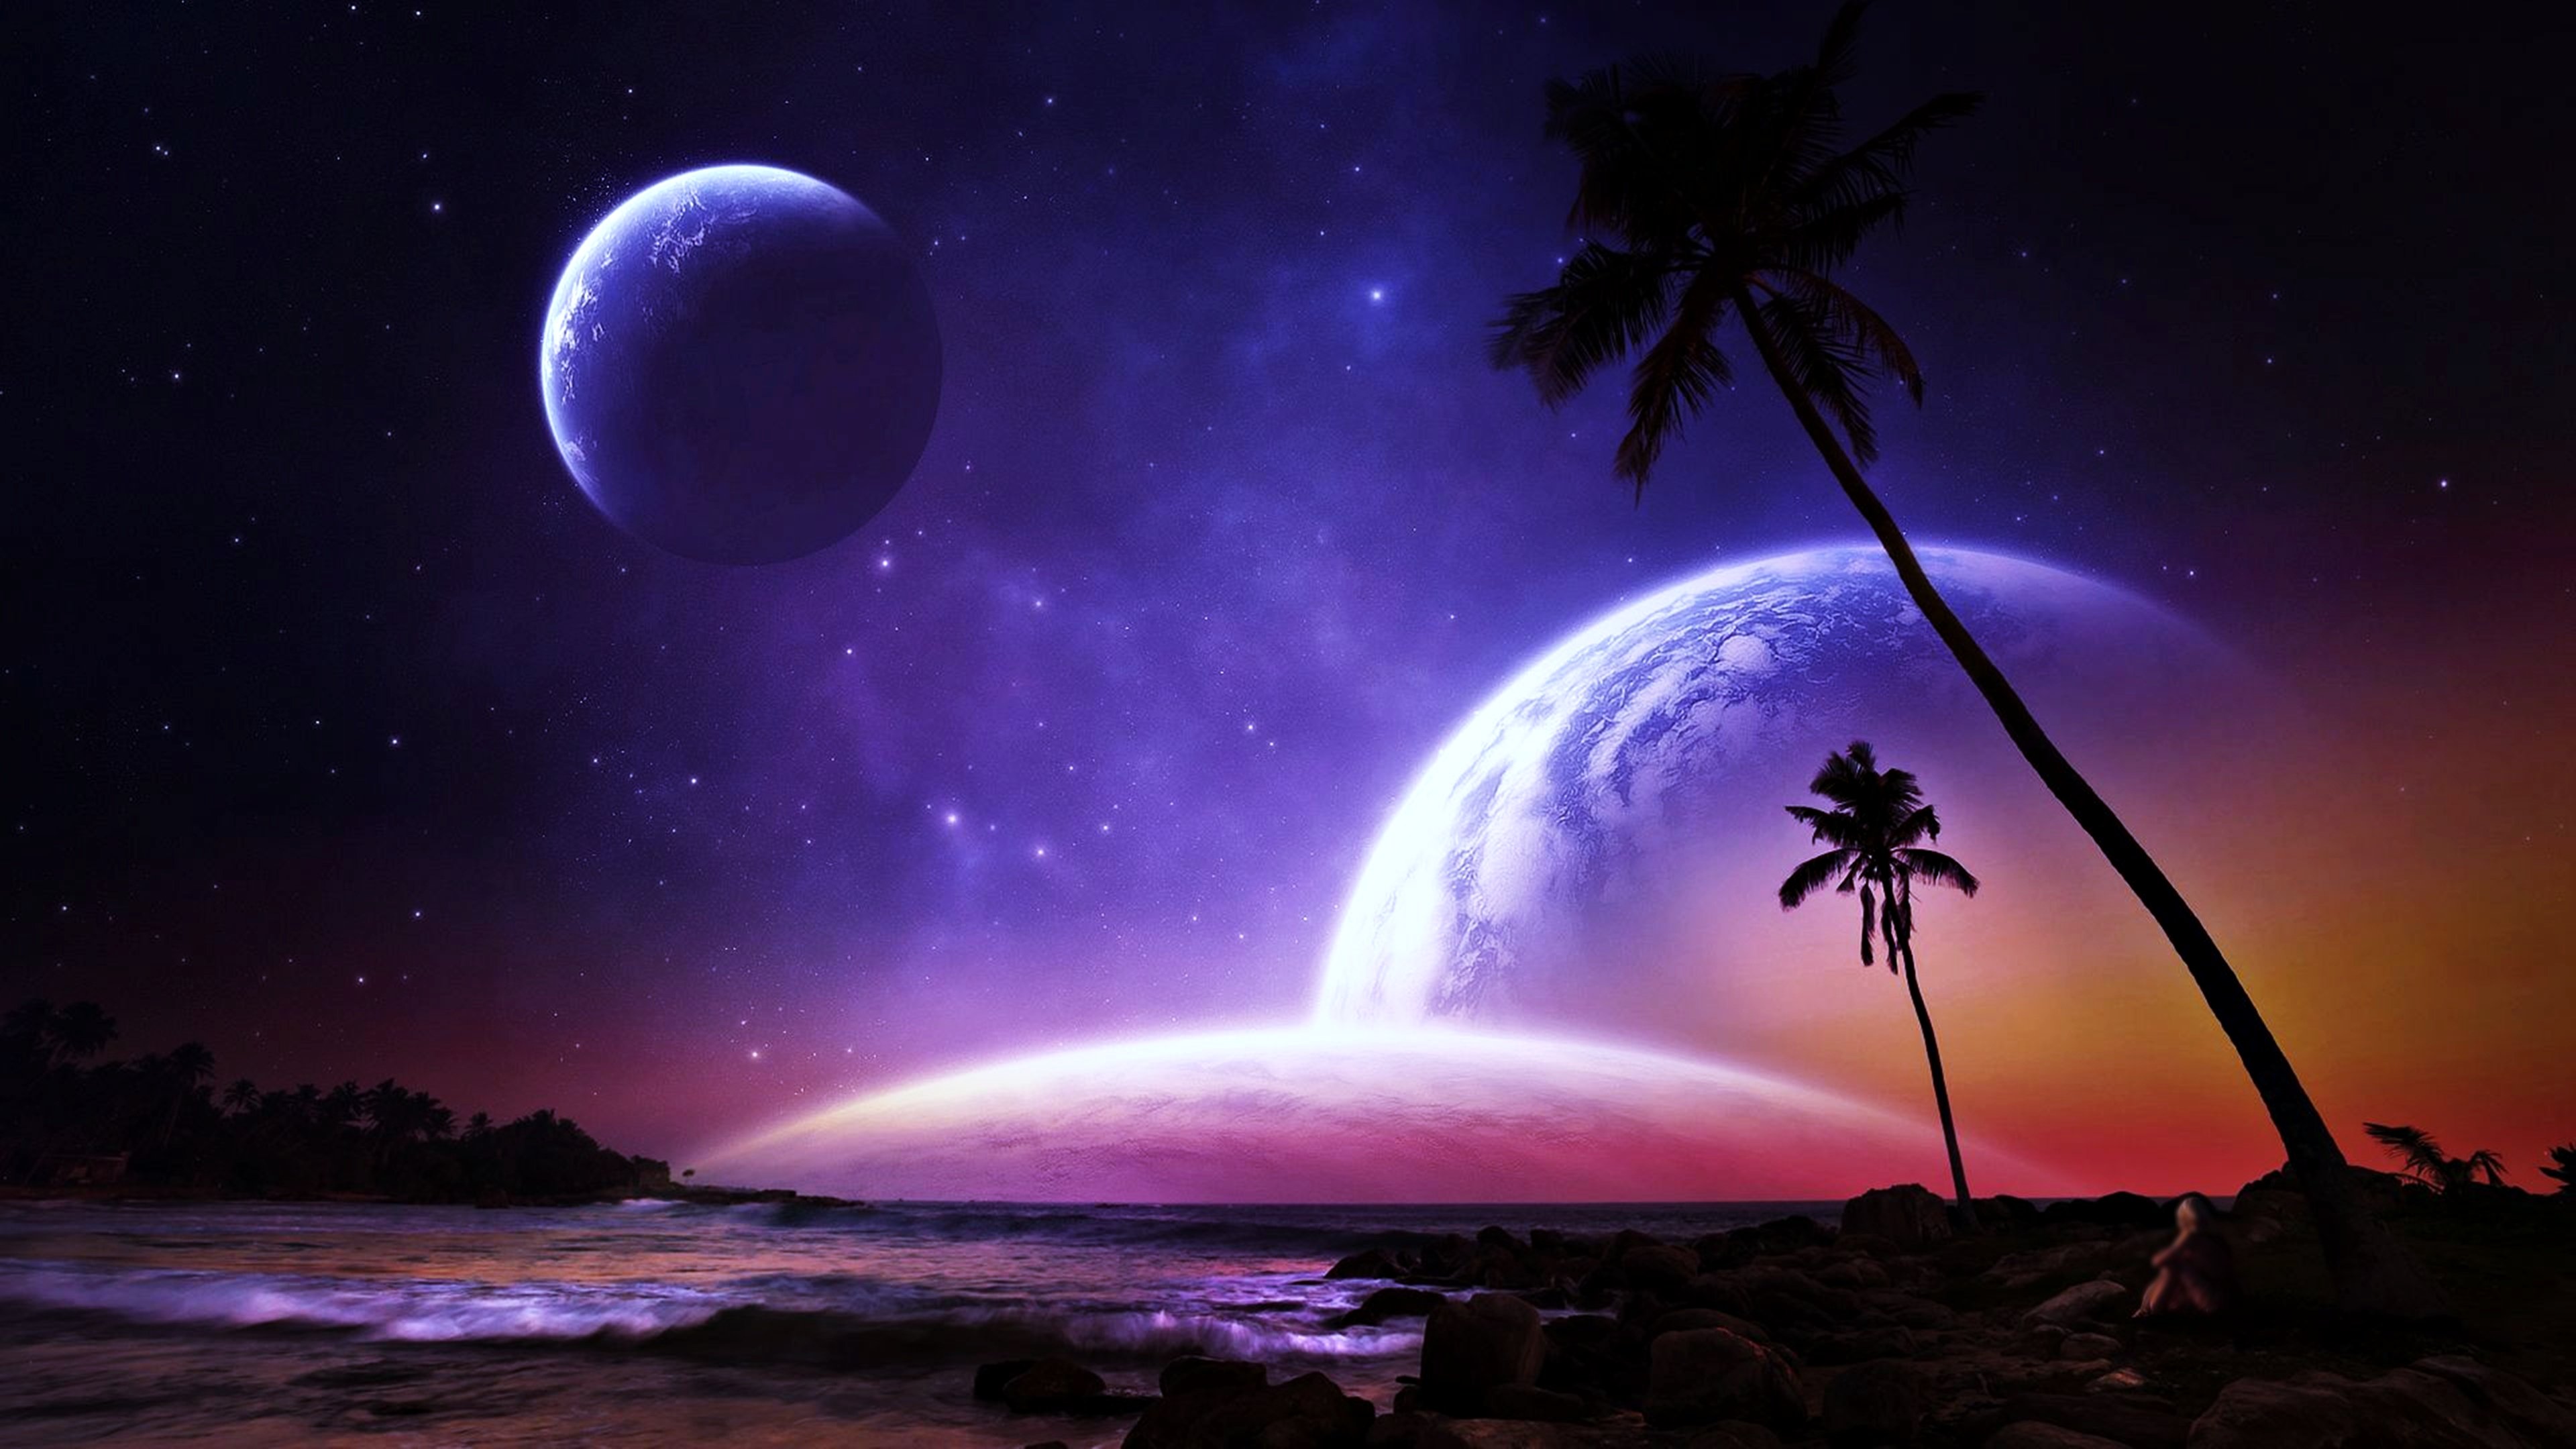 planets, Palms, Fantasy, Dreams, Colorful, Beaches, Space, Stars, Galaxy, Worlds, Earth Wallpaper HD / Desktop and Mobile Background